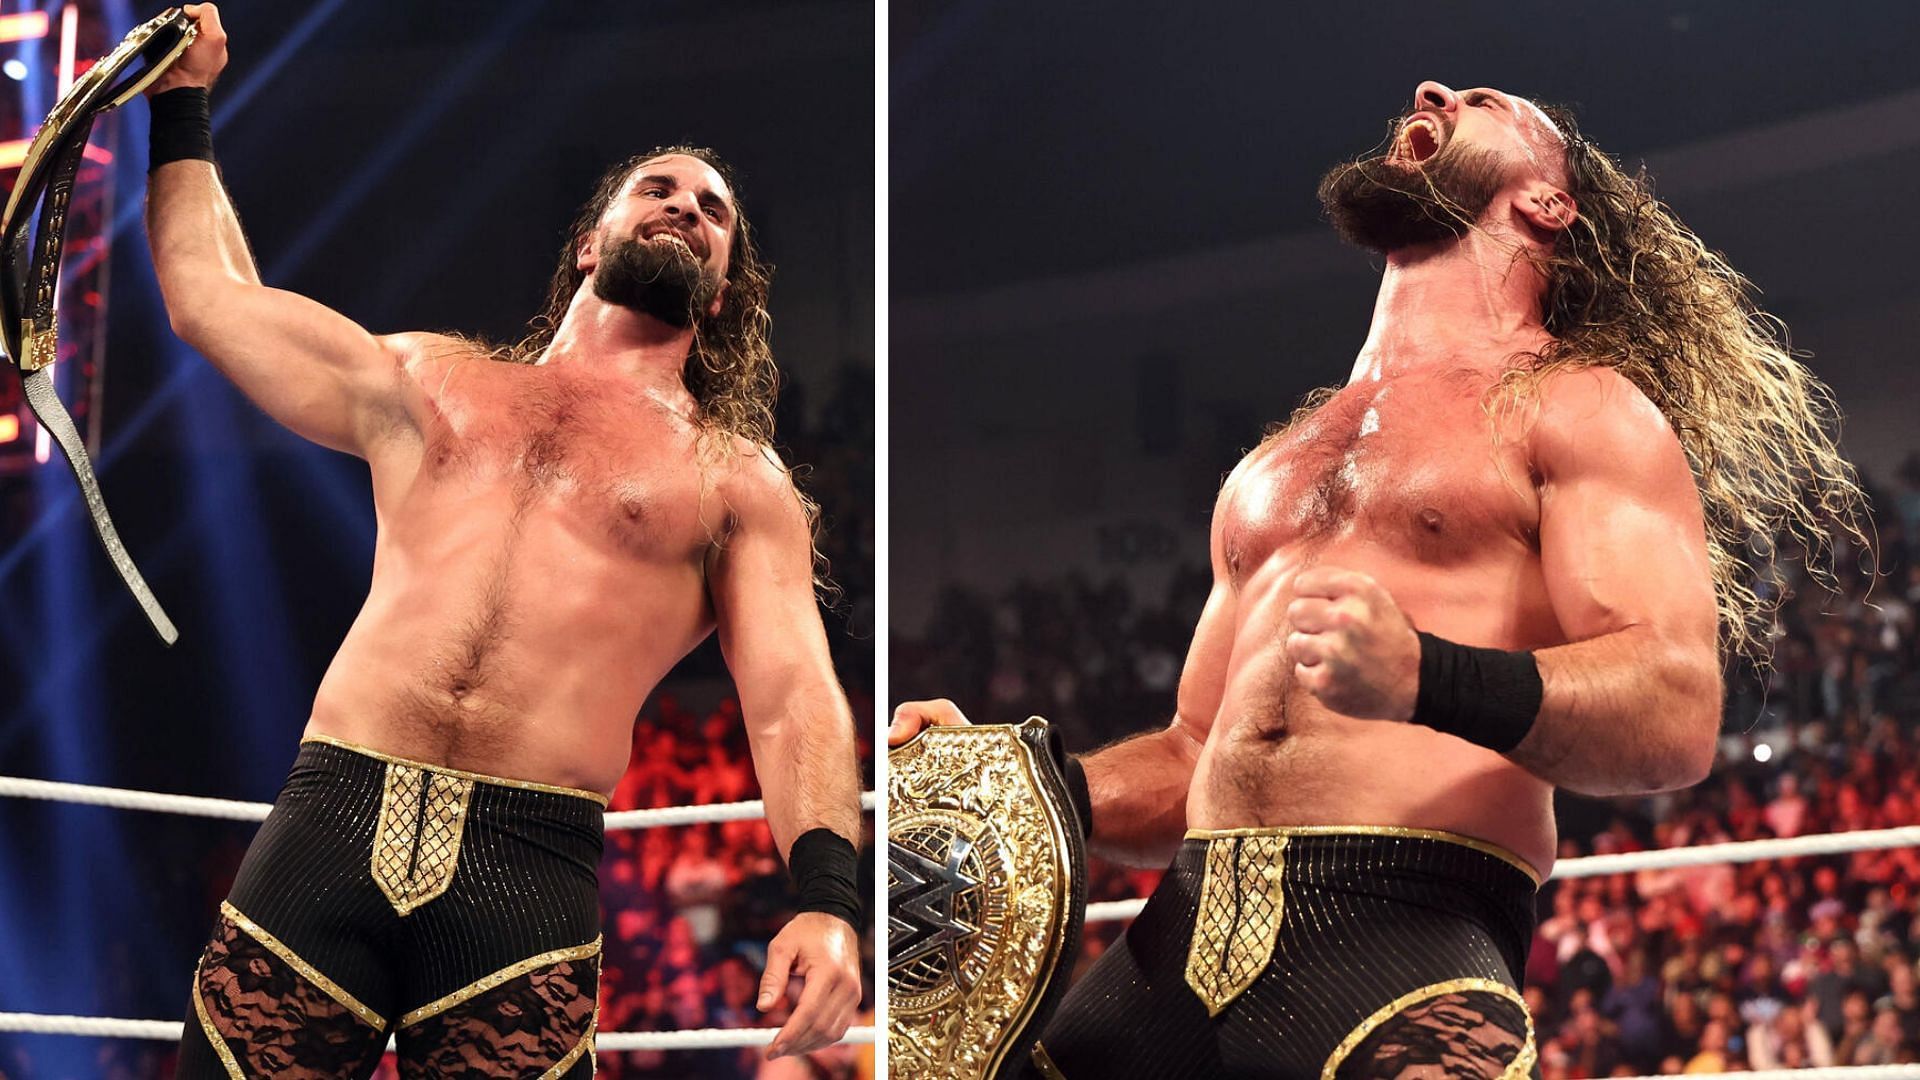 Rollins is the reigning World Heavyweight Champion.